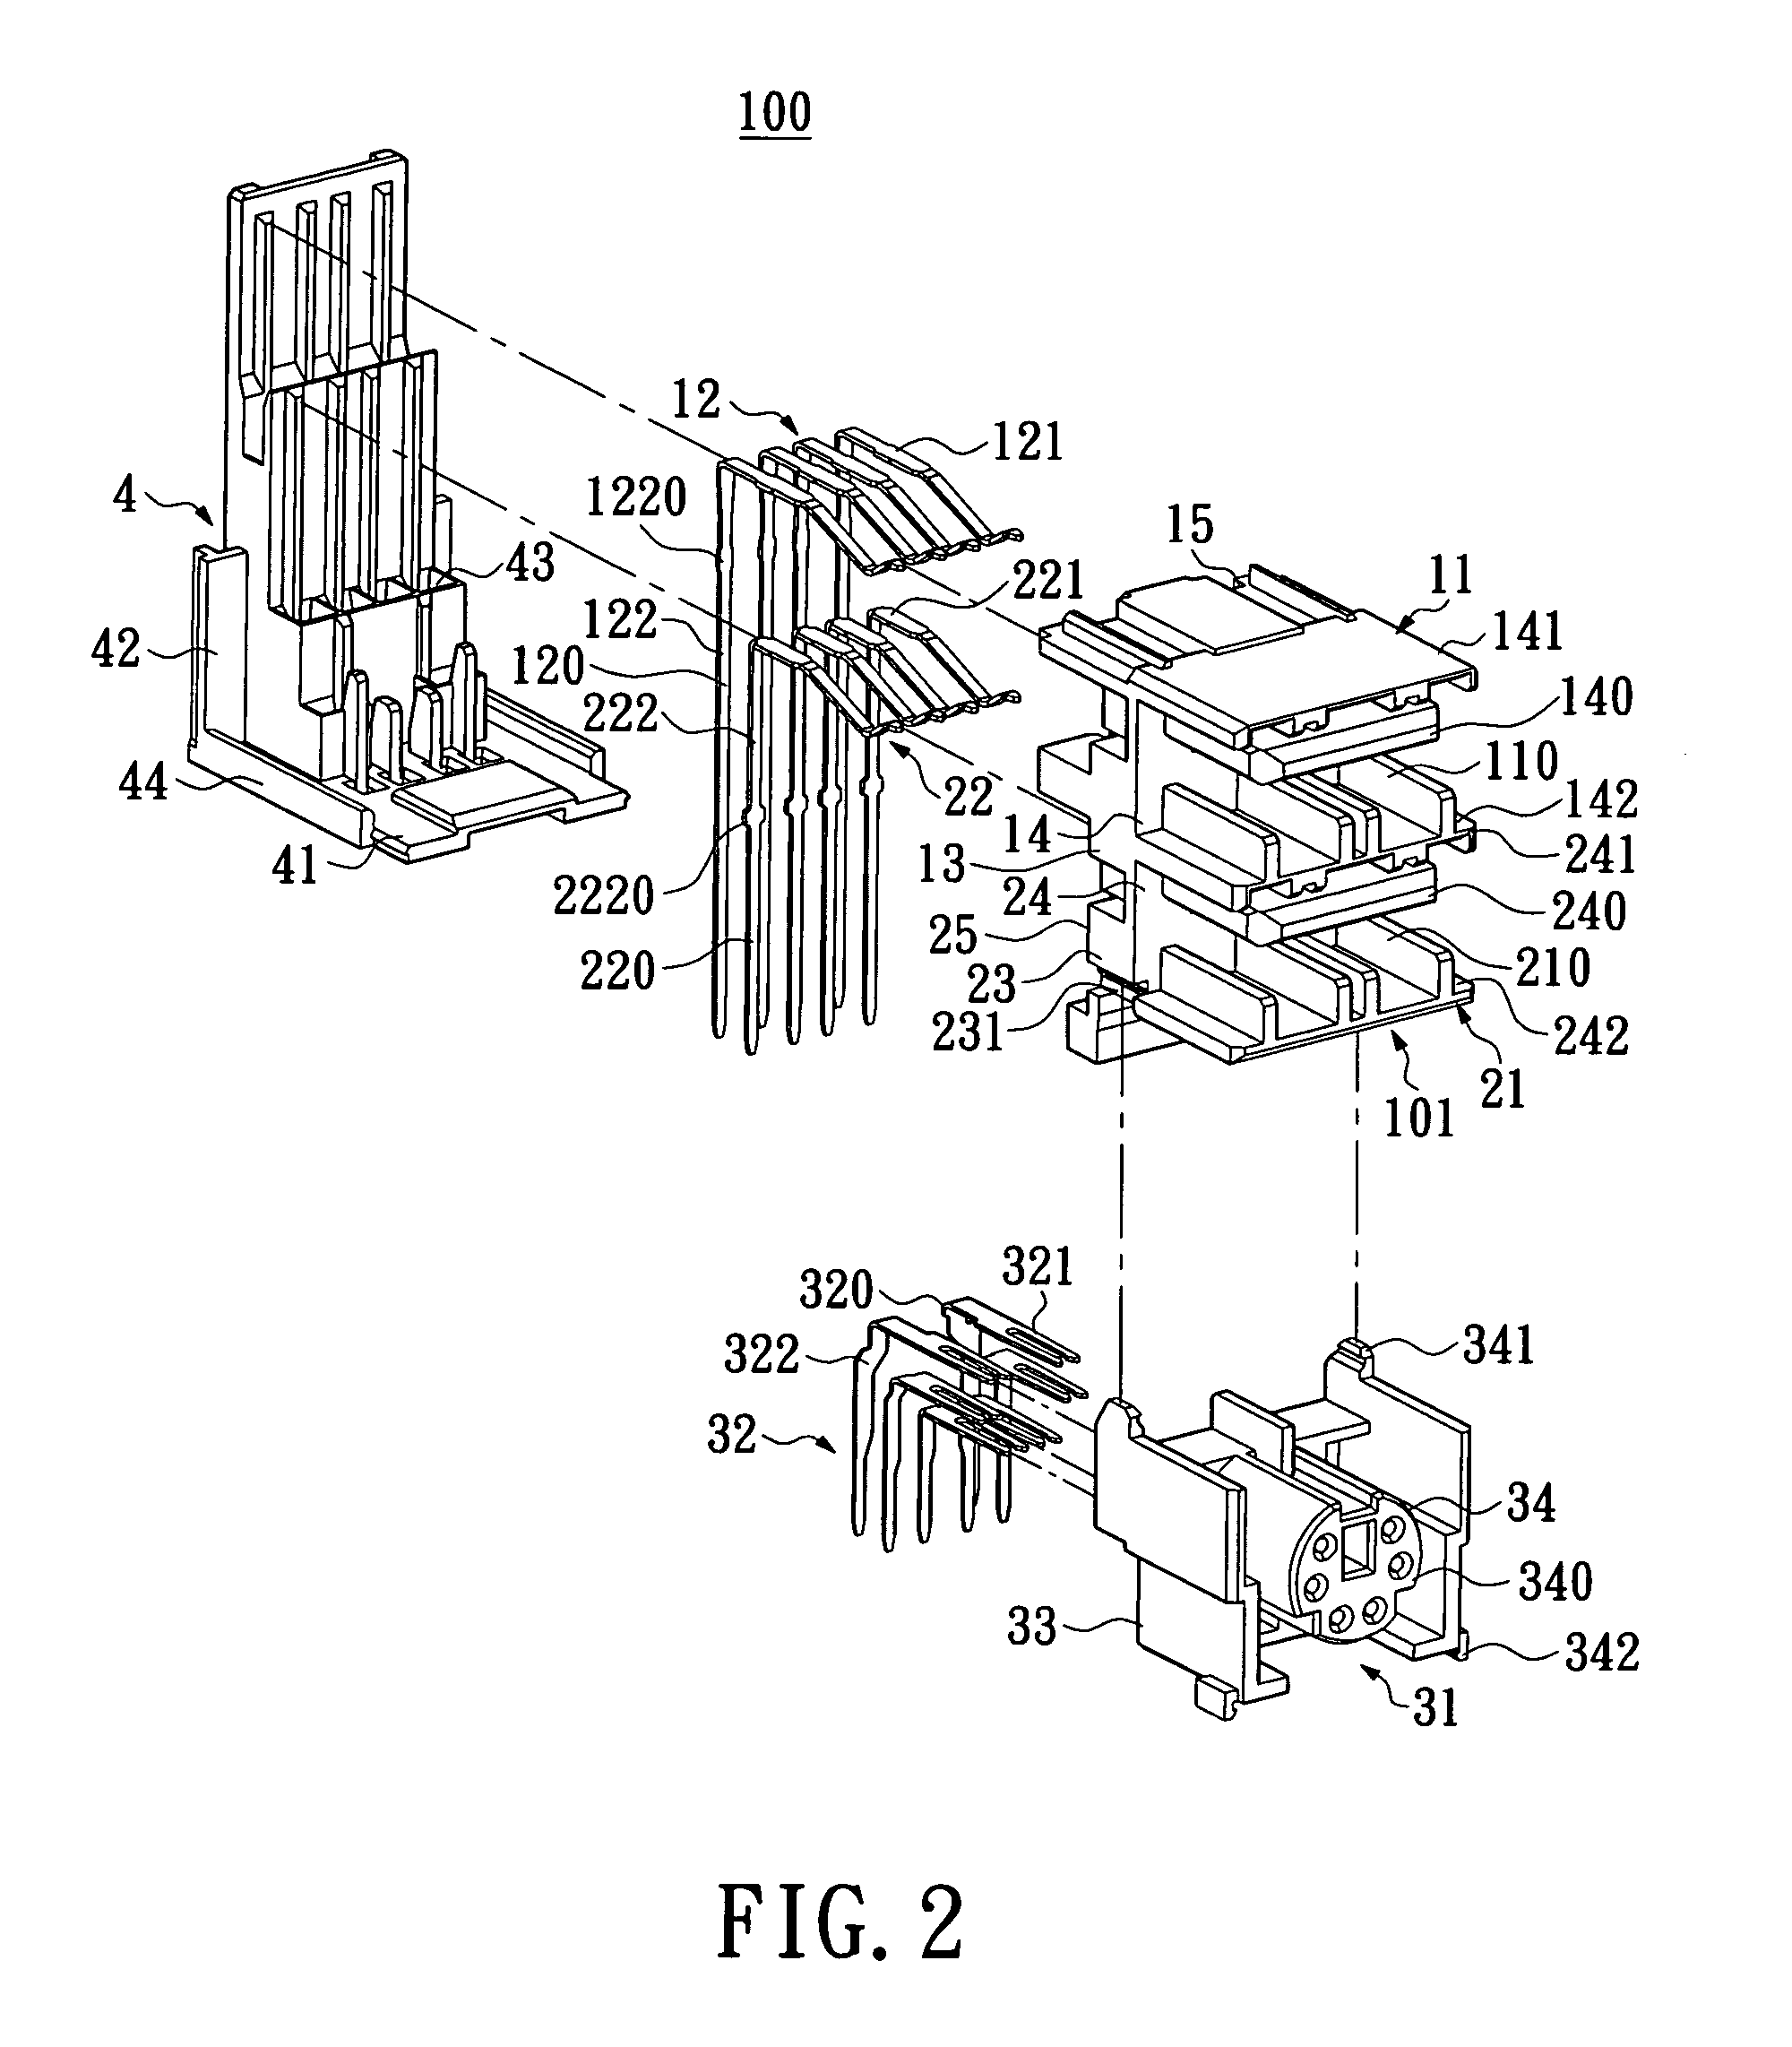 Method of assembling conductive terminals of a plurality of electrical connectors and electrical connector module assembled thereby